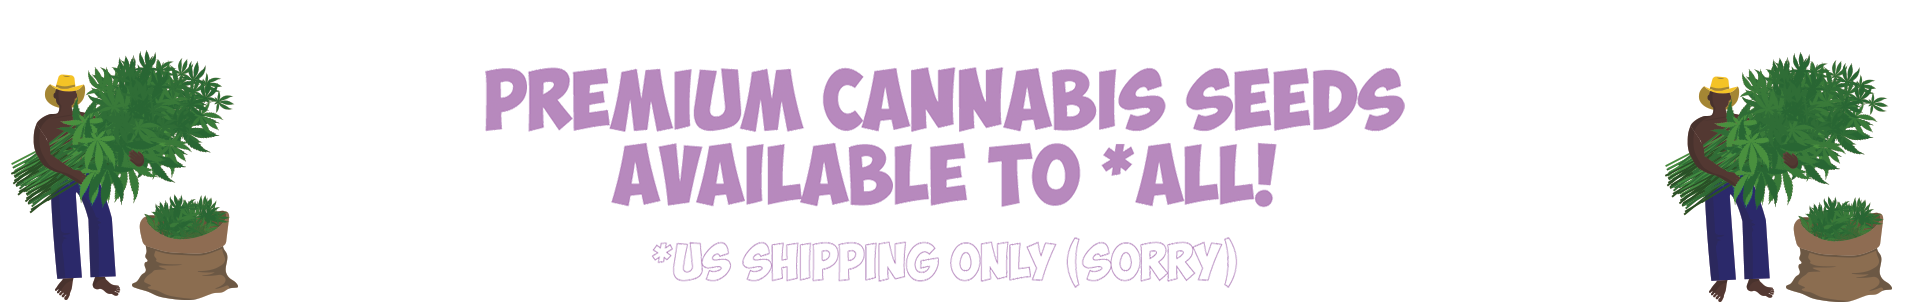 premium cannabis seeds available for shipping in the US